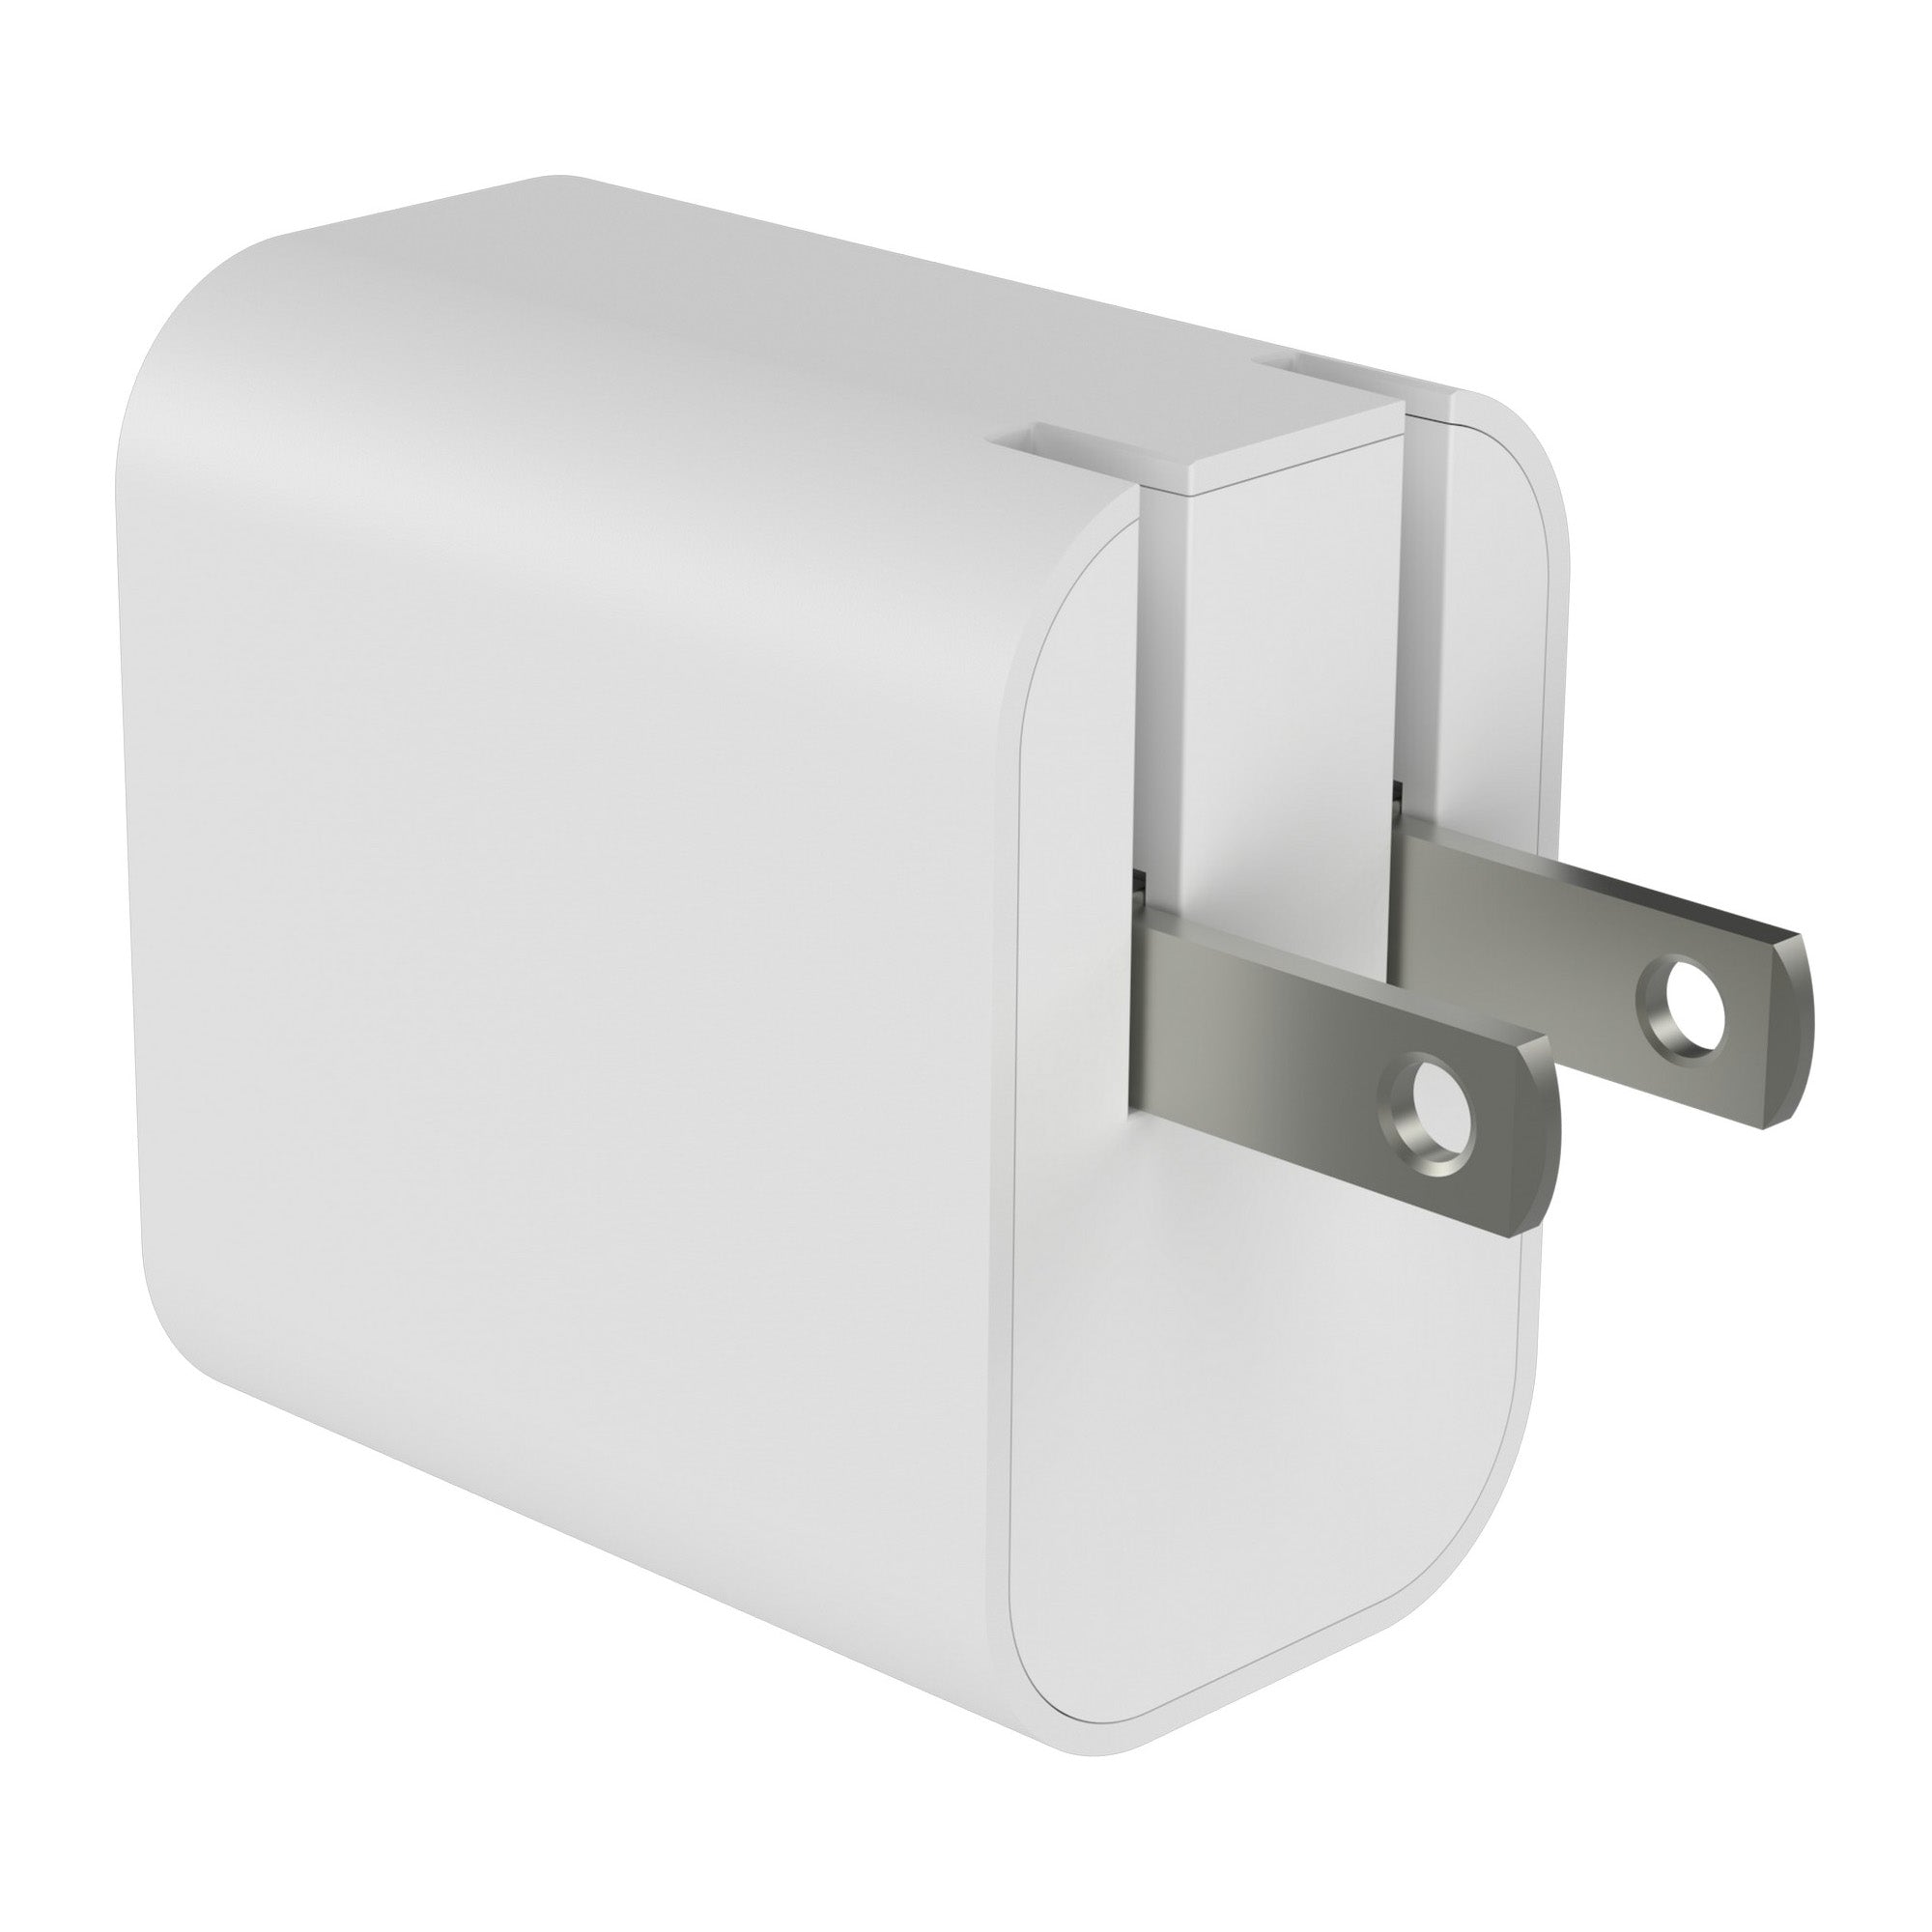 Mophie 30W USB-C PD Speedport GaN Wall Charger - White - 15-11426